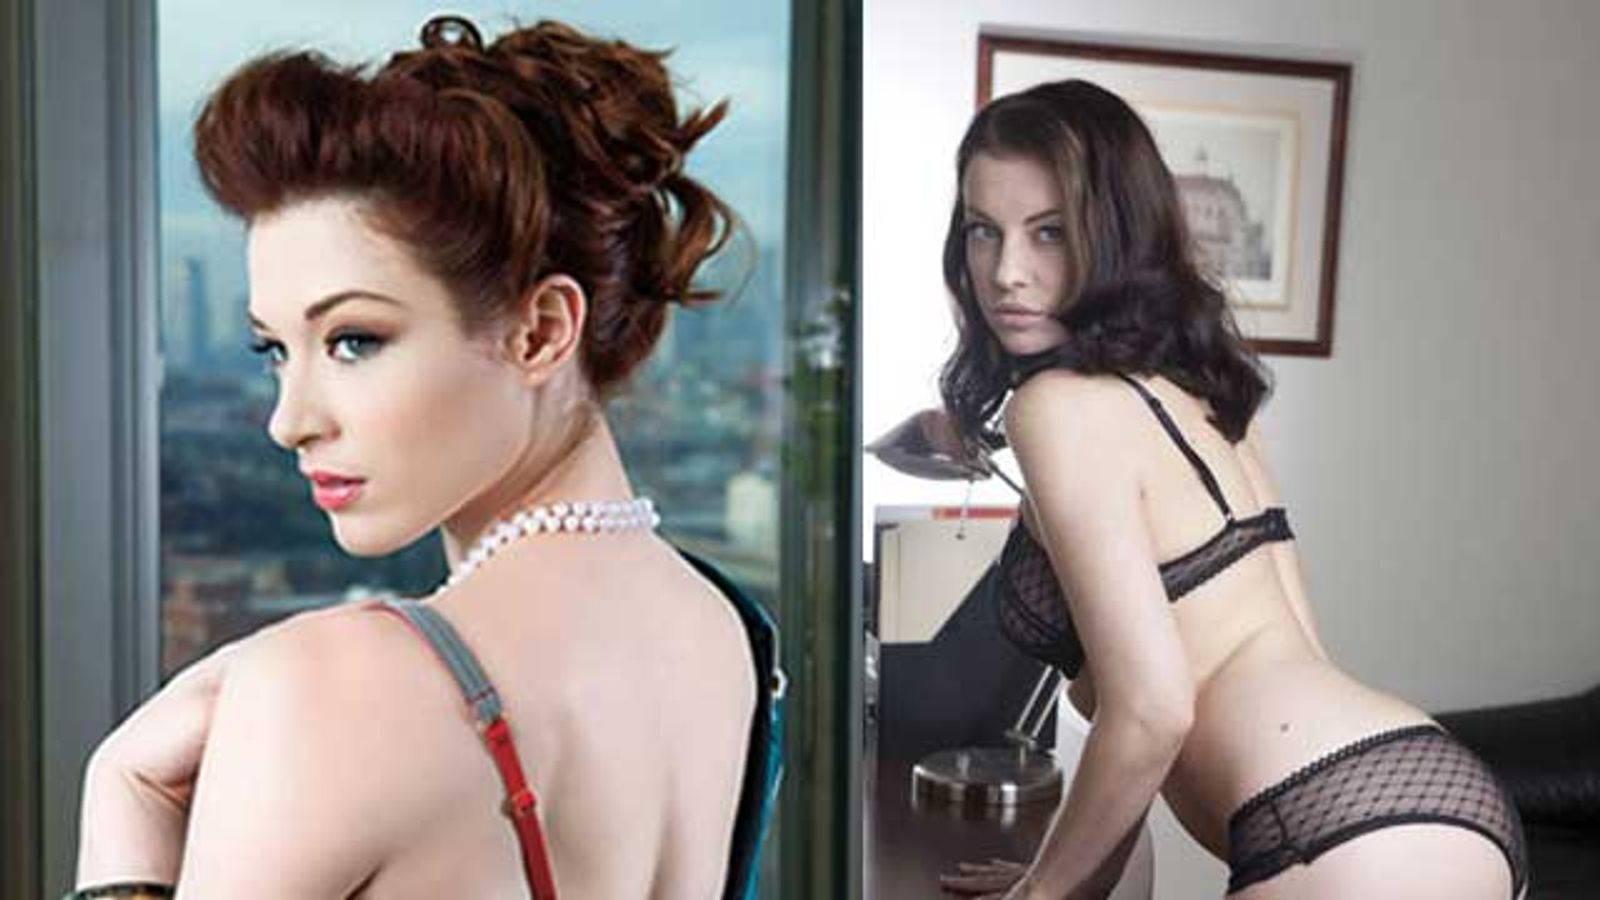 Stoya, Sovereign Syre Appear at Darling House in NY, Dec. 3